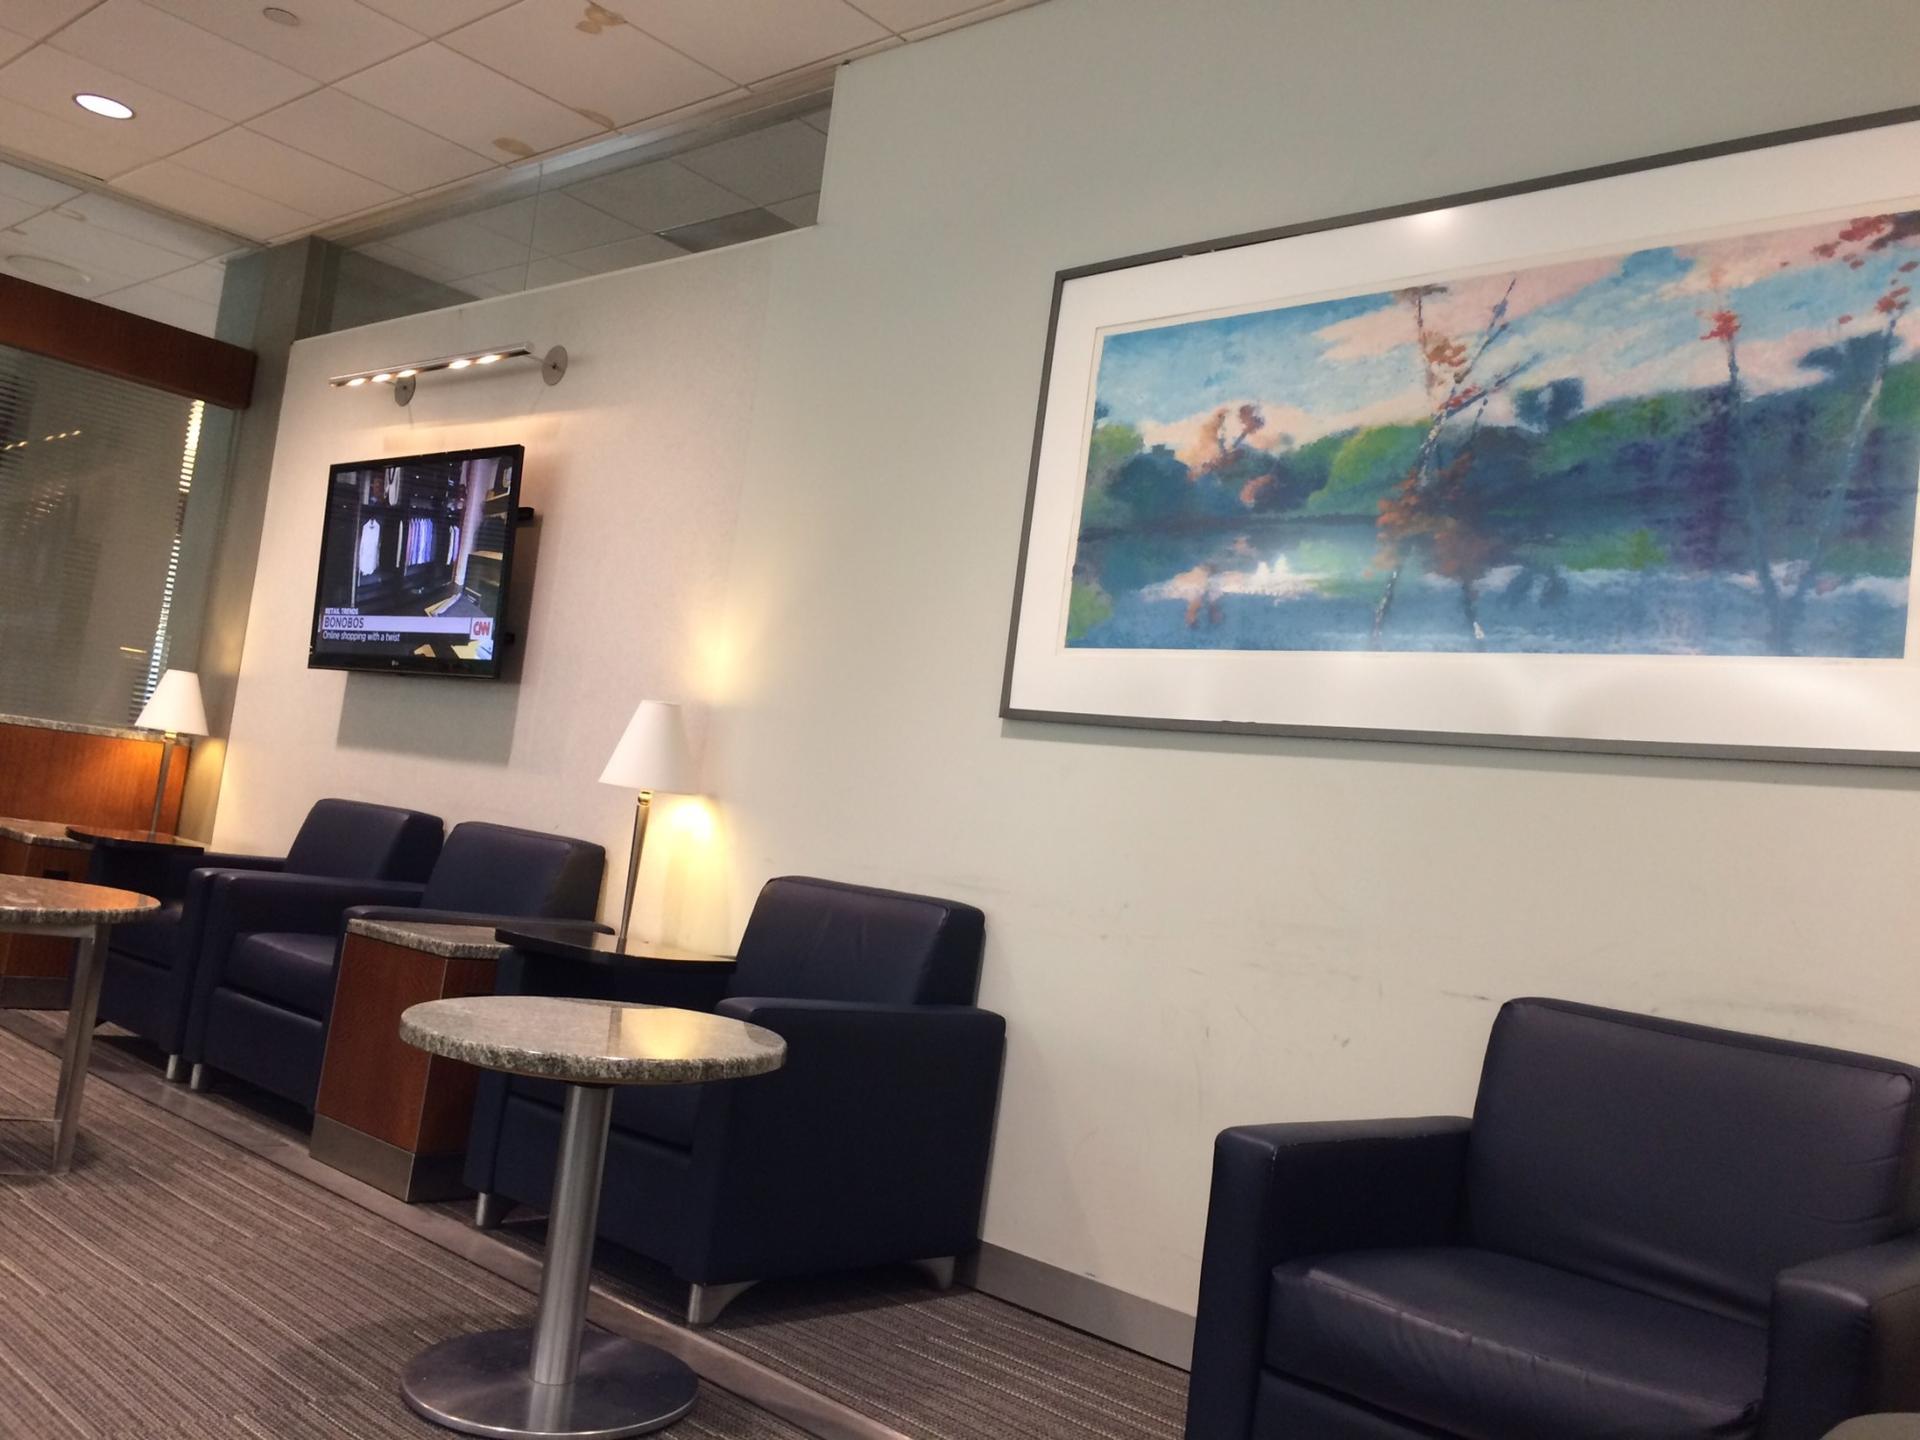 American Airlines Admirals Club image 23 of 48